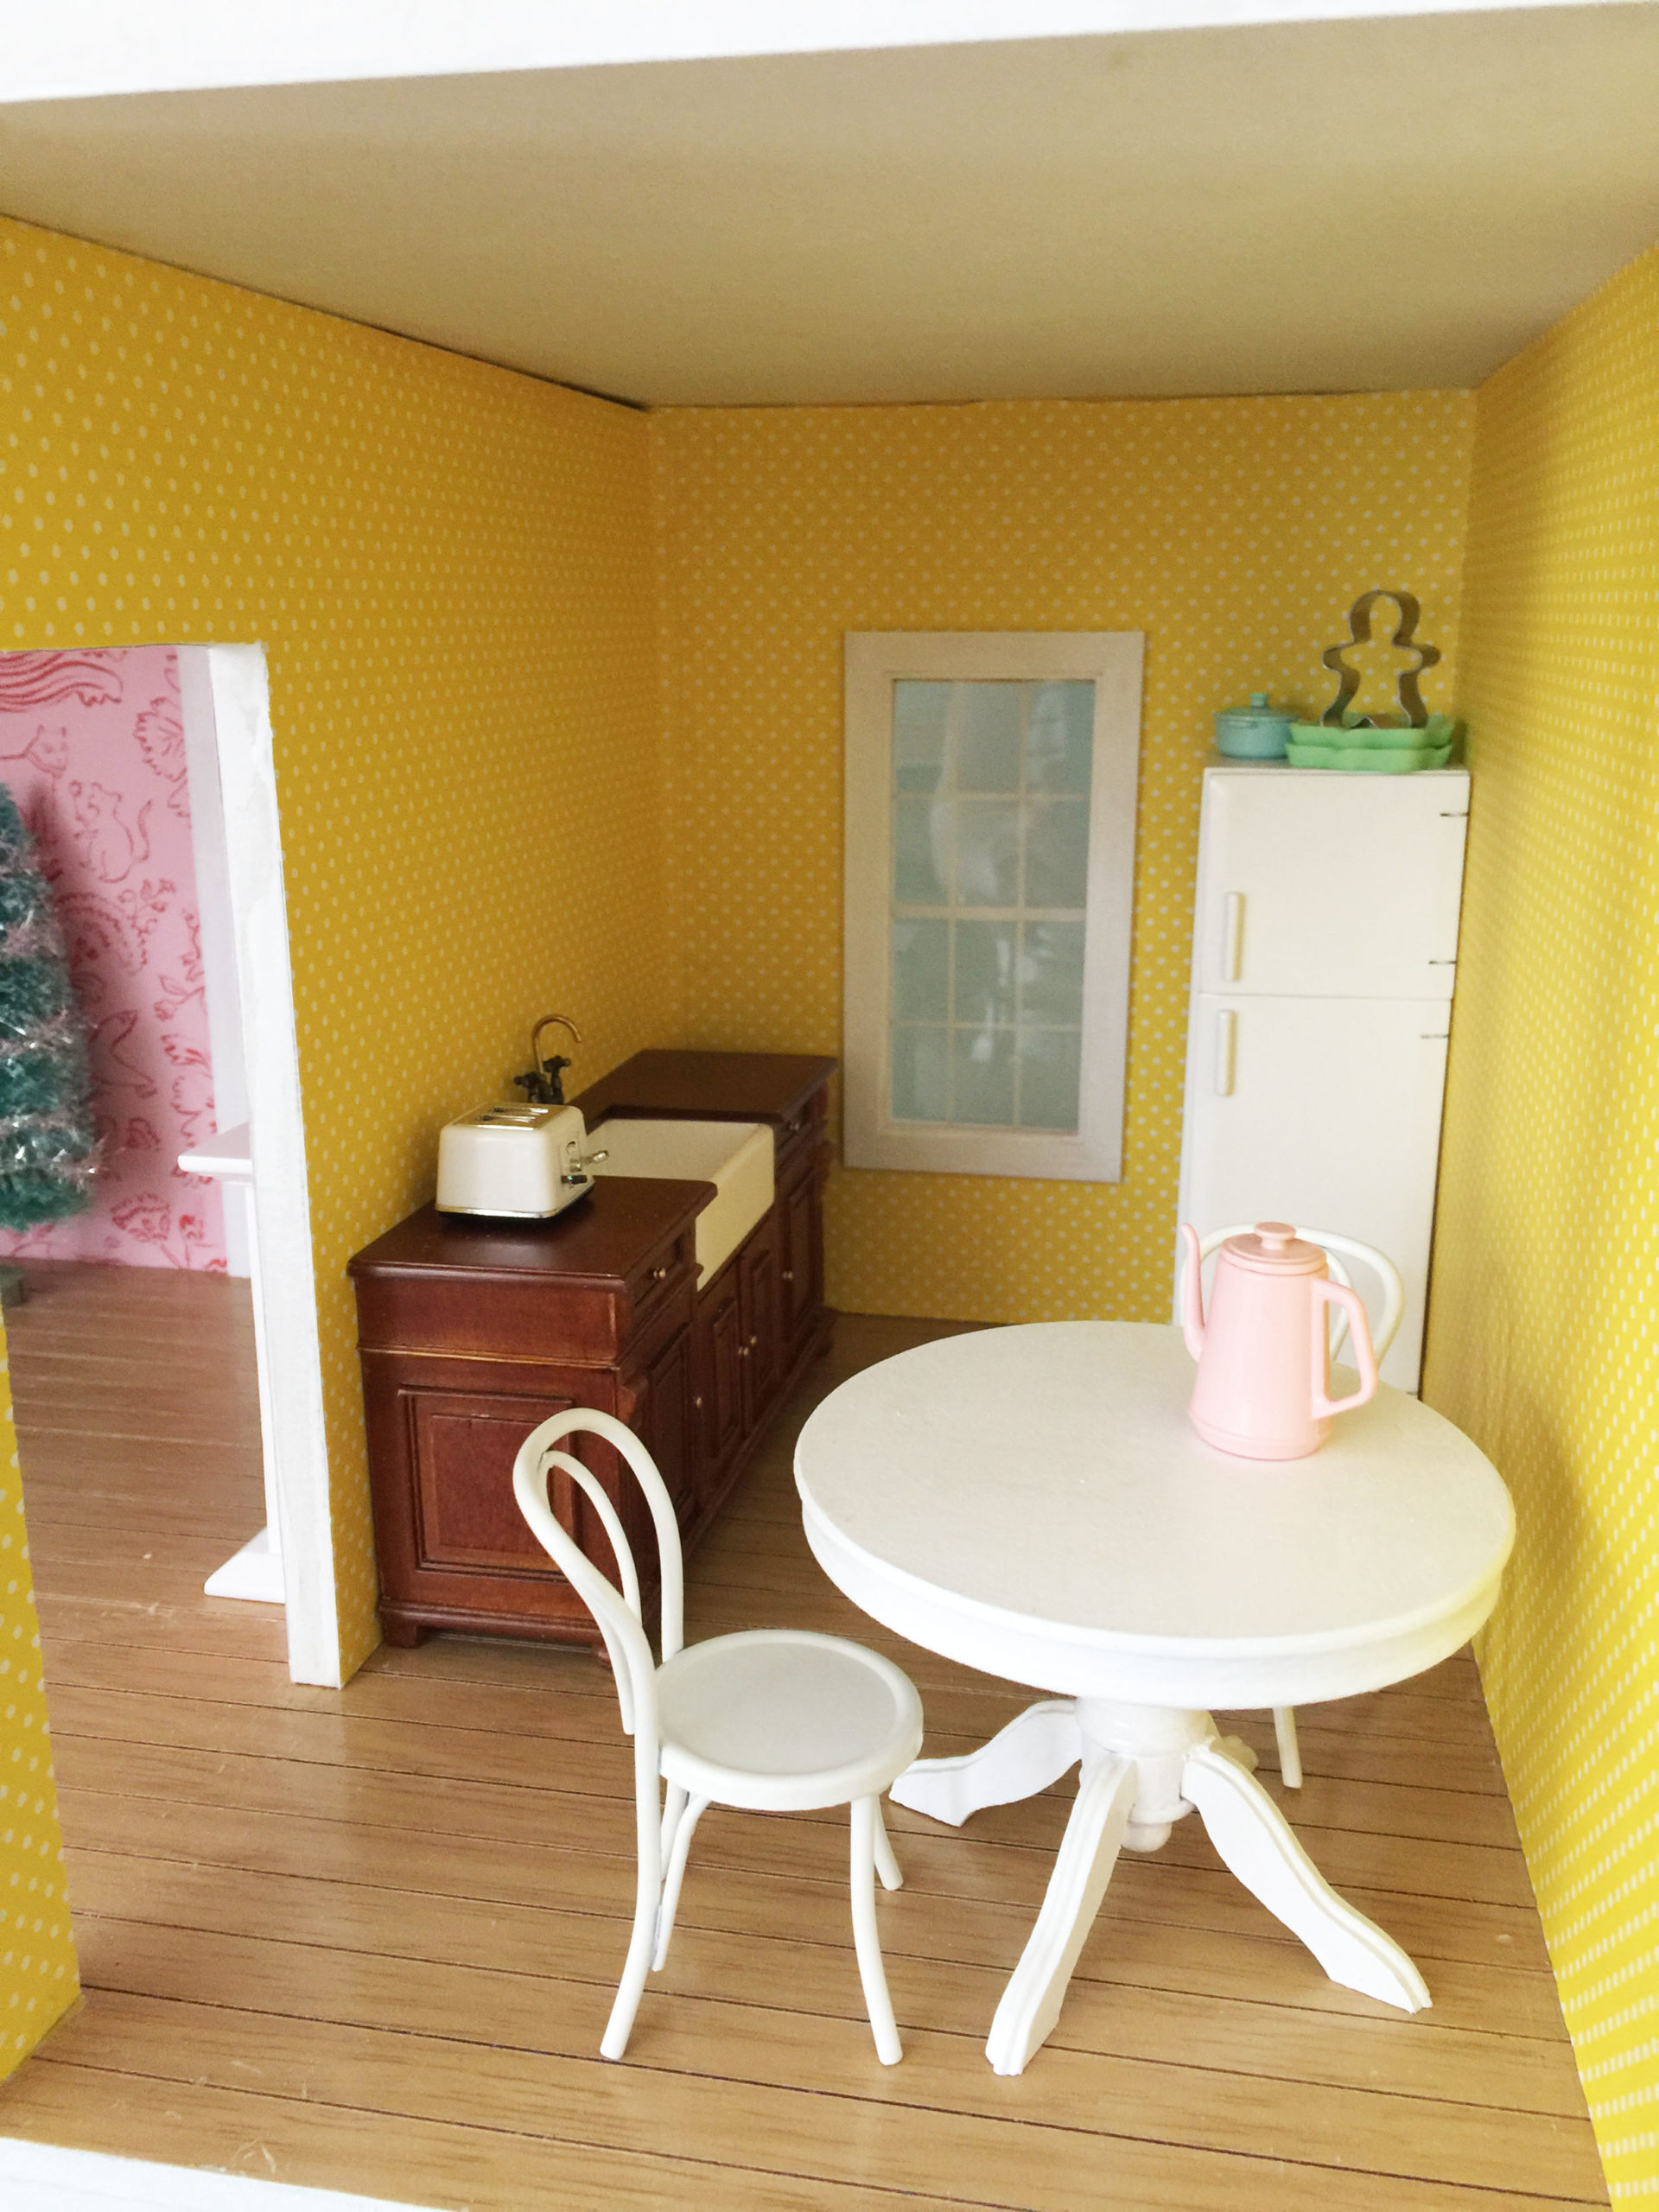 patch-and-dot-dollhouse-2